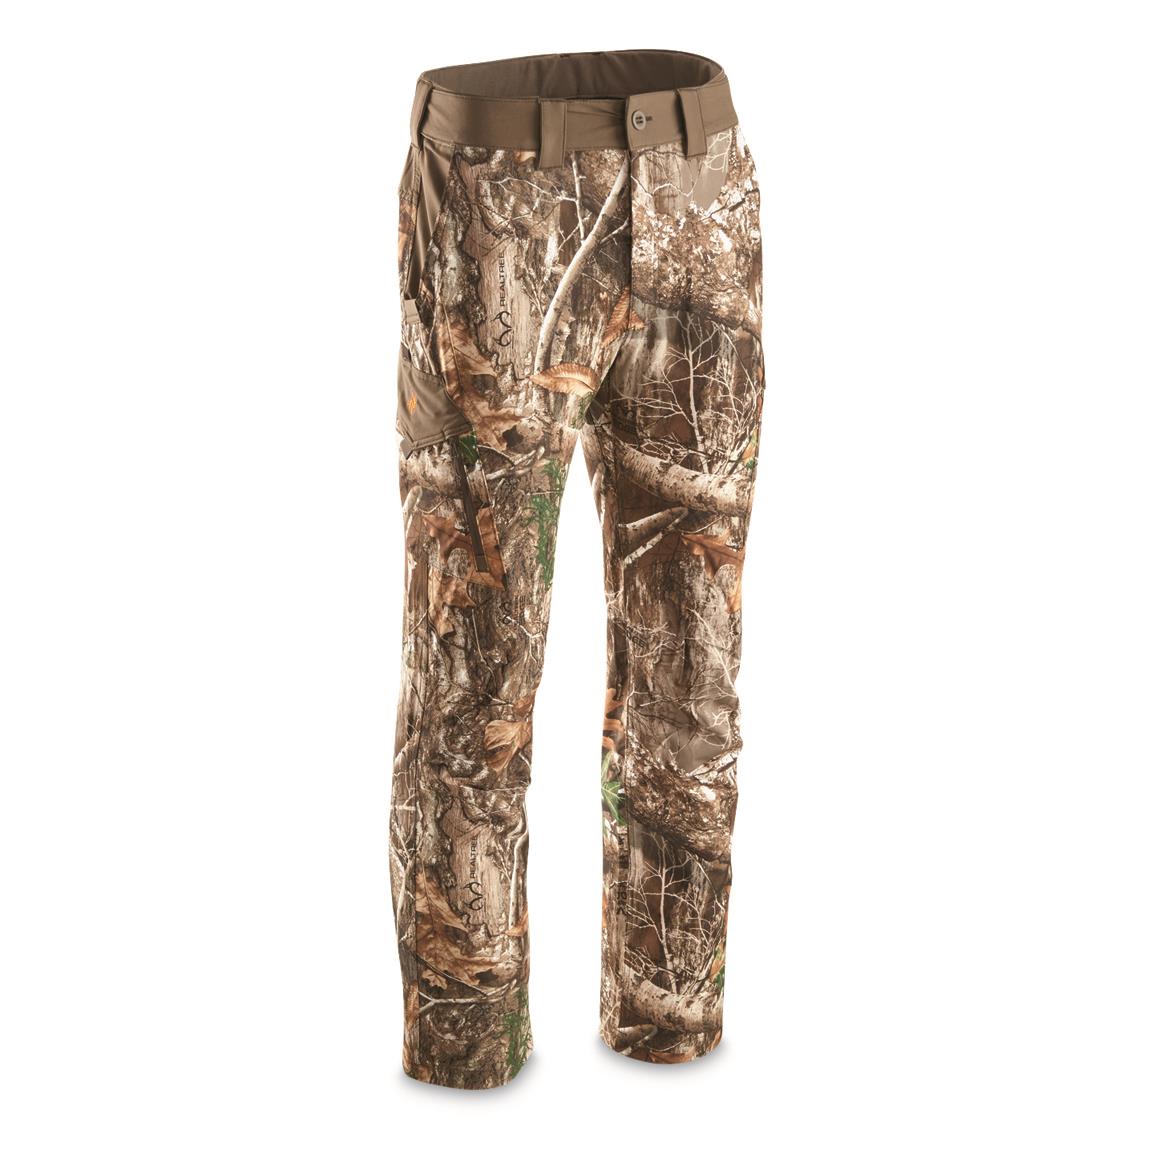 New REALTREE XTRA Men's 5 Pocket Flex Pants Camo Hunting Jeans CHOOSE YOUR SIZE 